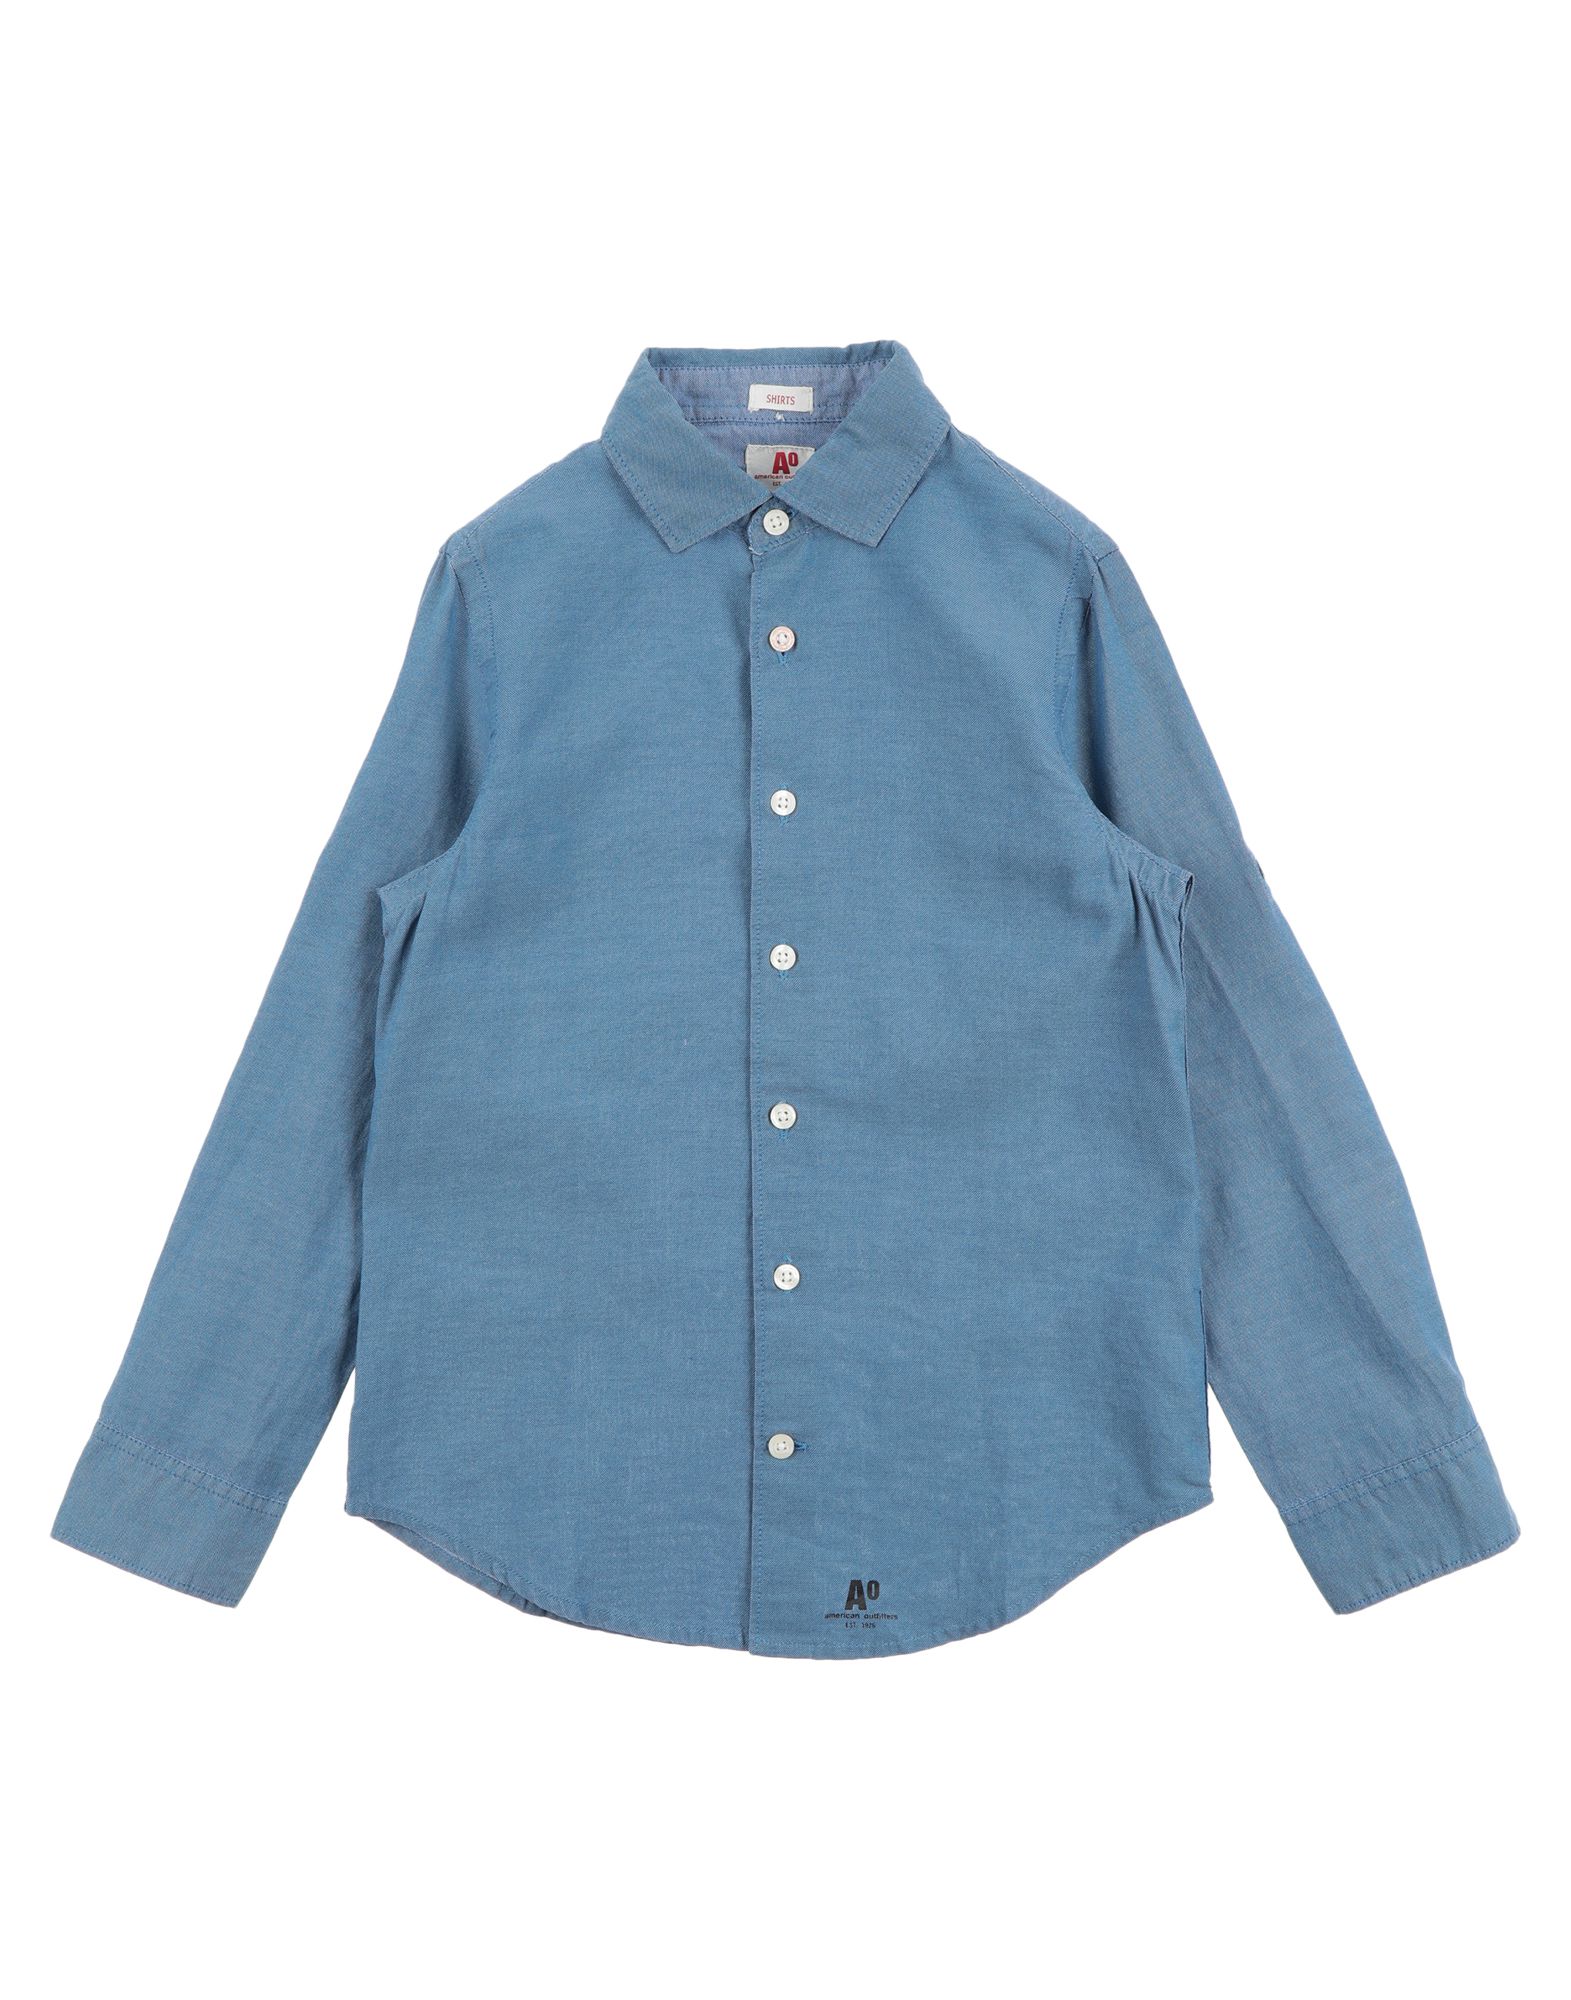 American Outfitters Kids' Shirts In Slate Blue